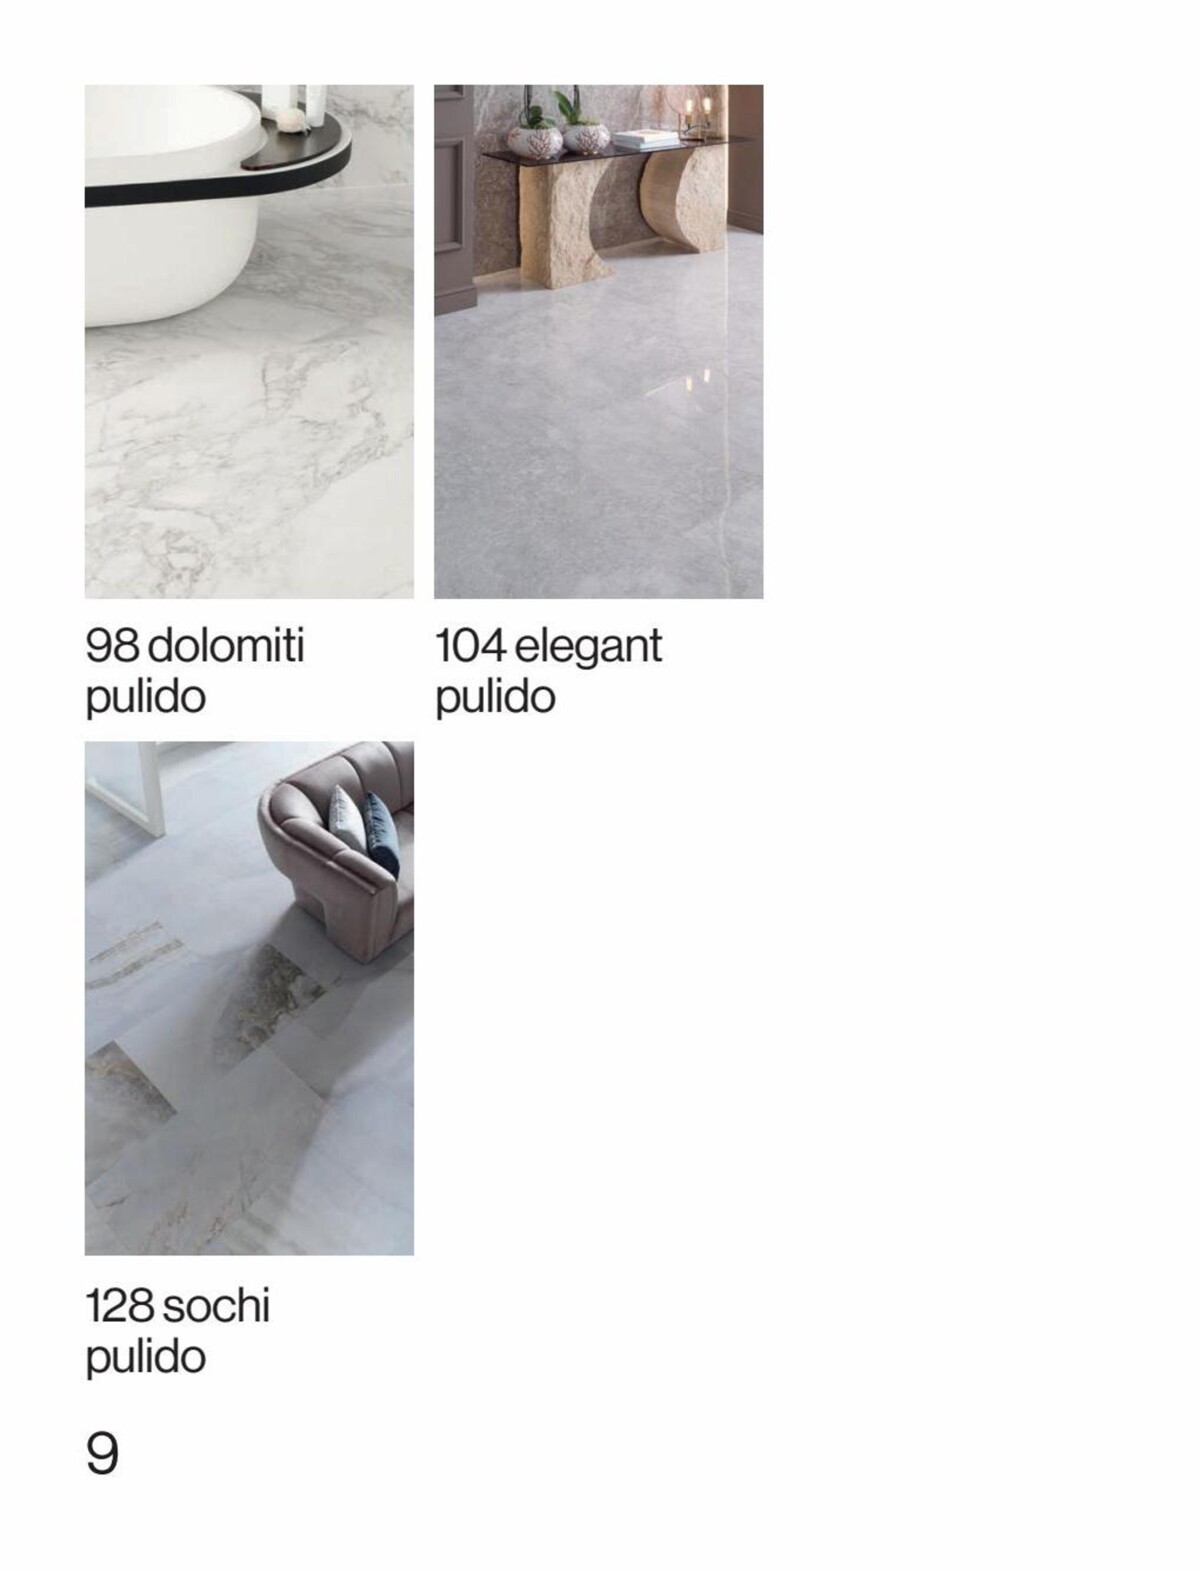 Catalogue MARMI,a ceramic tile that echoes the purity of marble, page 00009